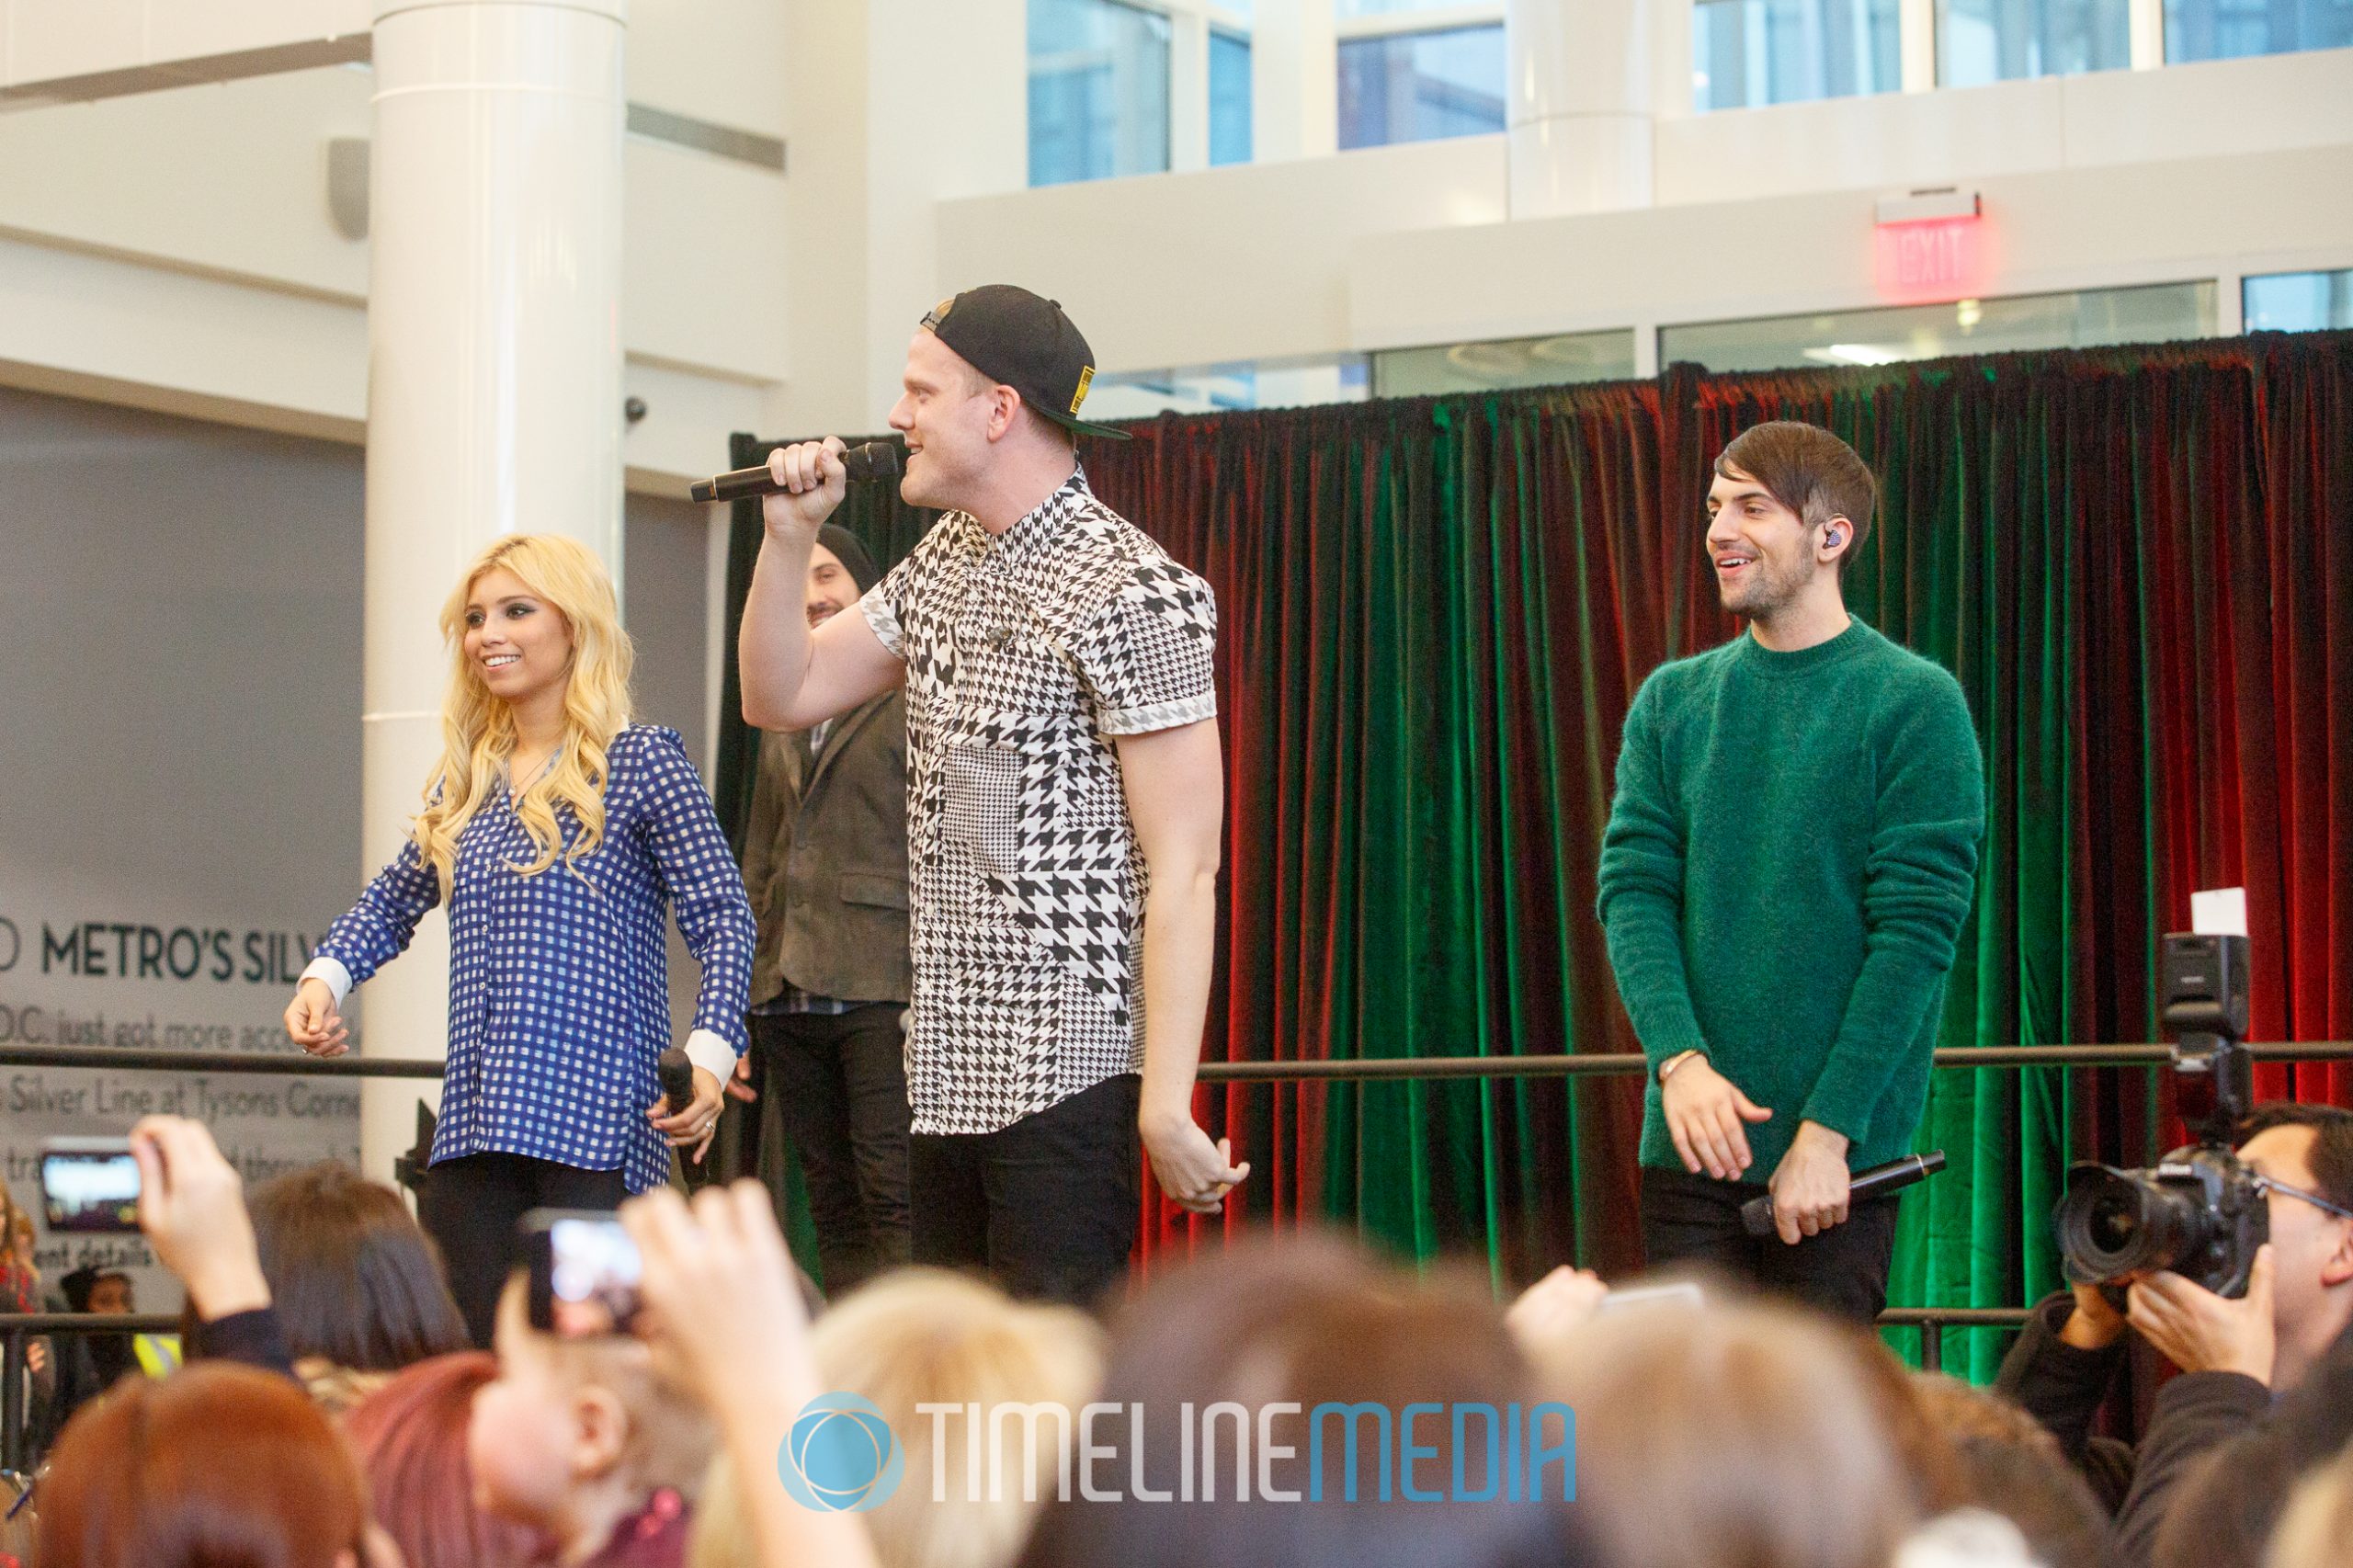 Pentatonix performs holiday music at the Concourse in Tysons Corner Center